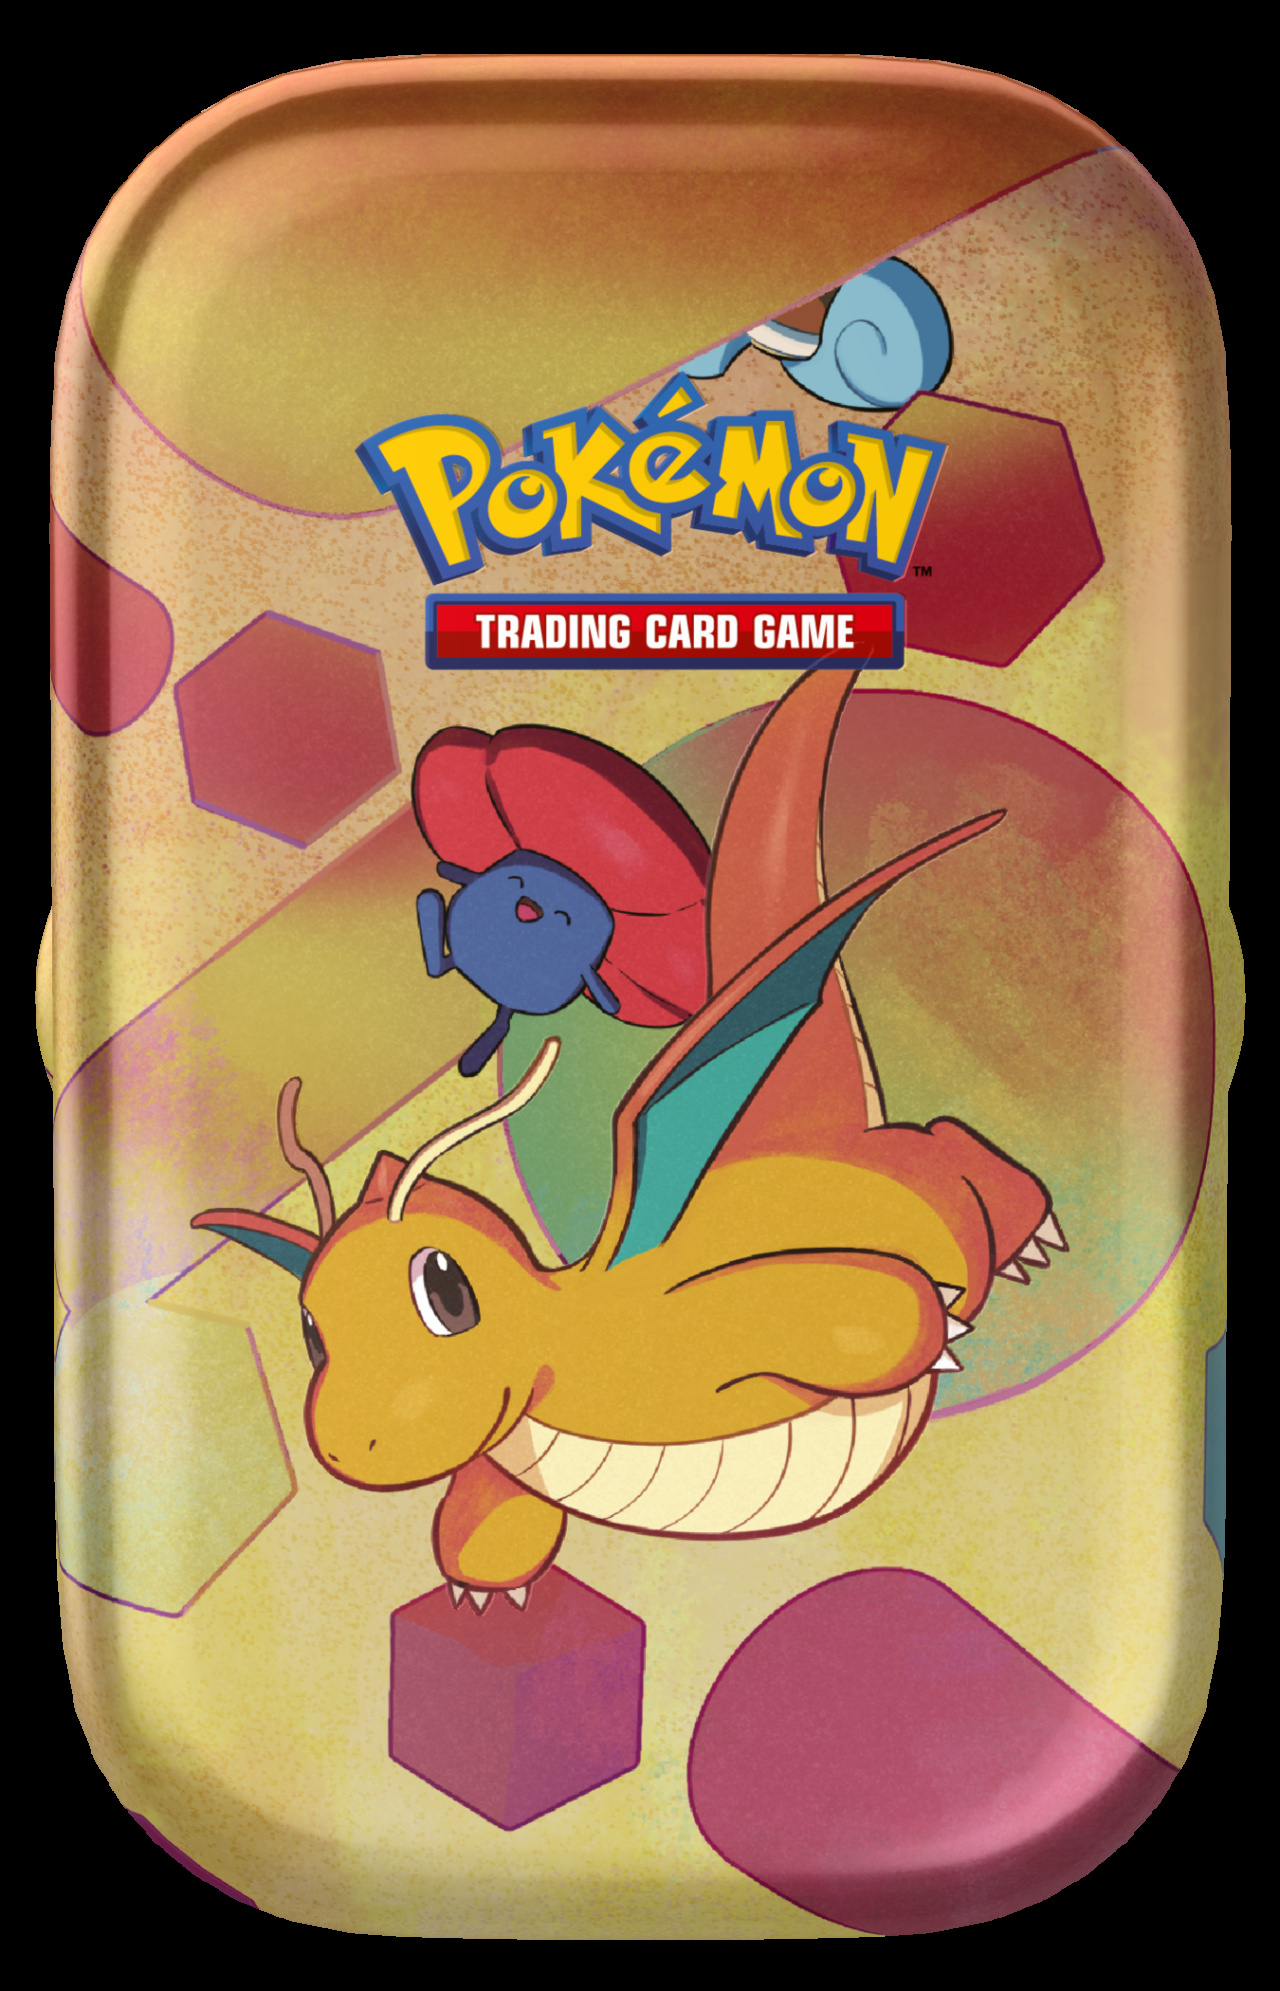 The Pokémon Trading Card Game Is Getting A Throwback Set Featuring The  Original 151 Pokémon